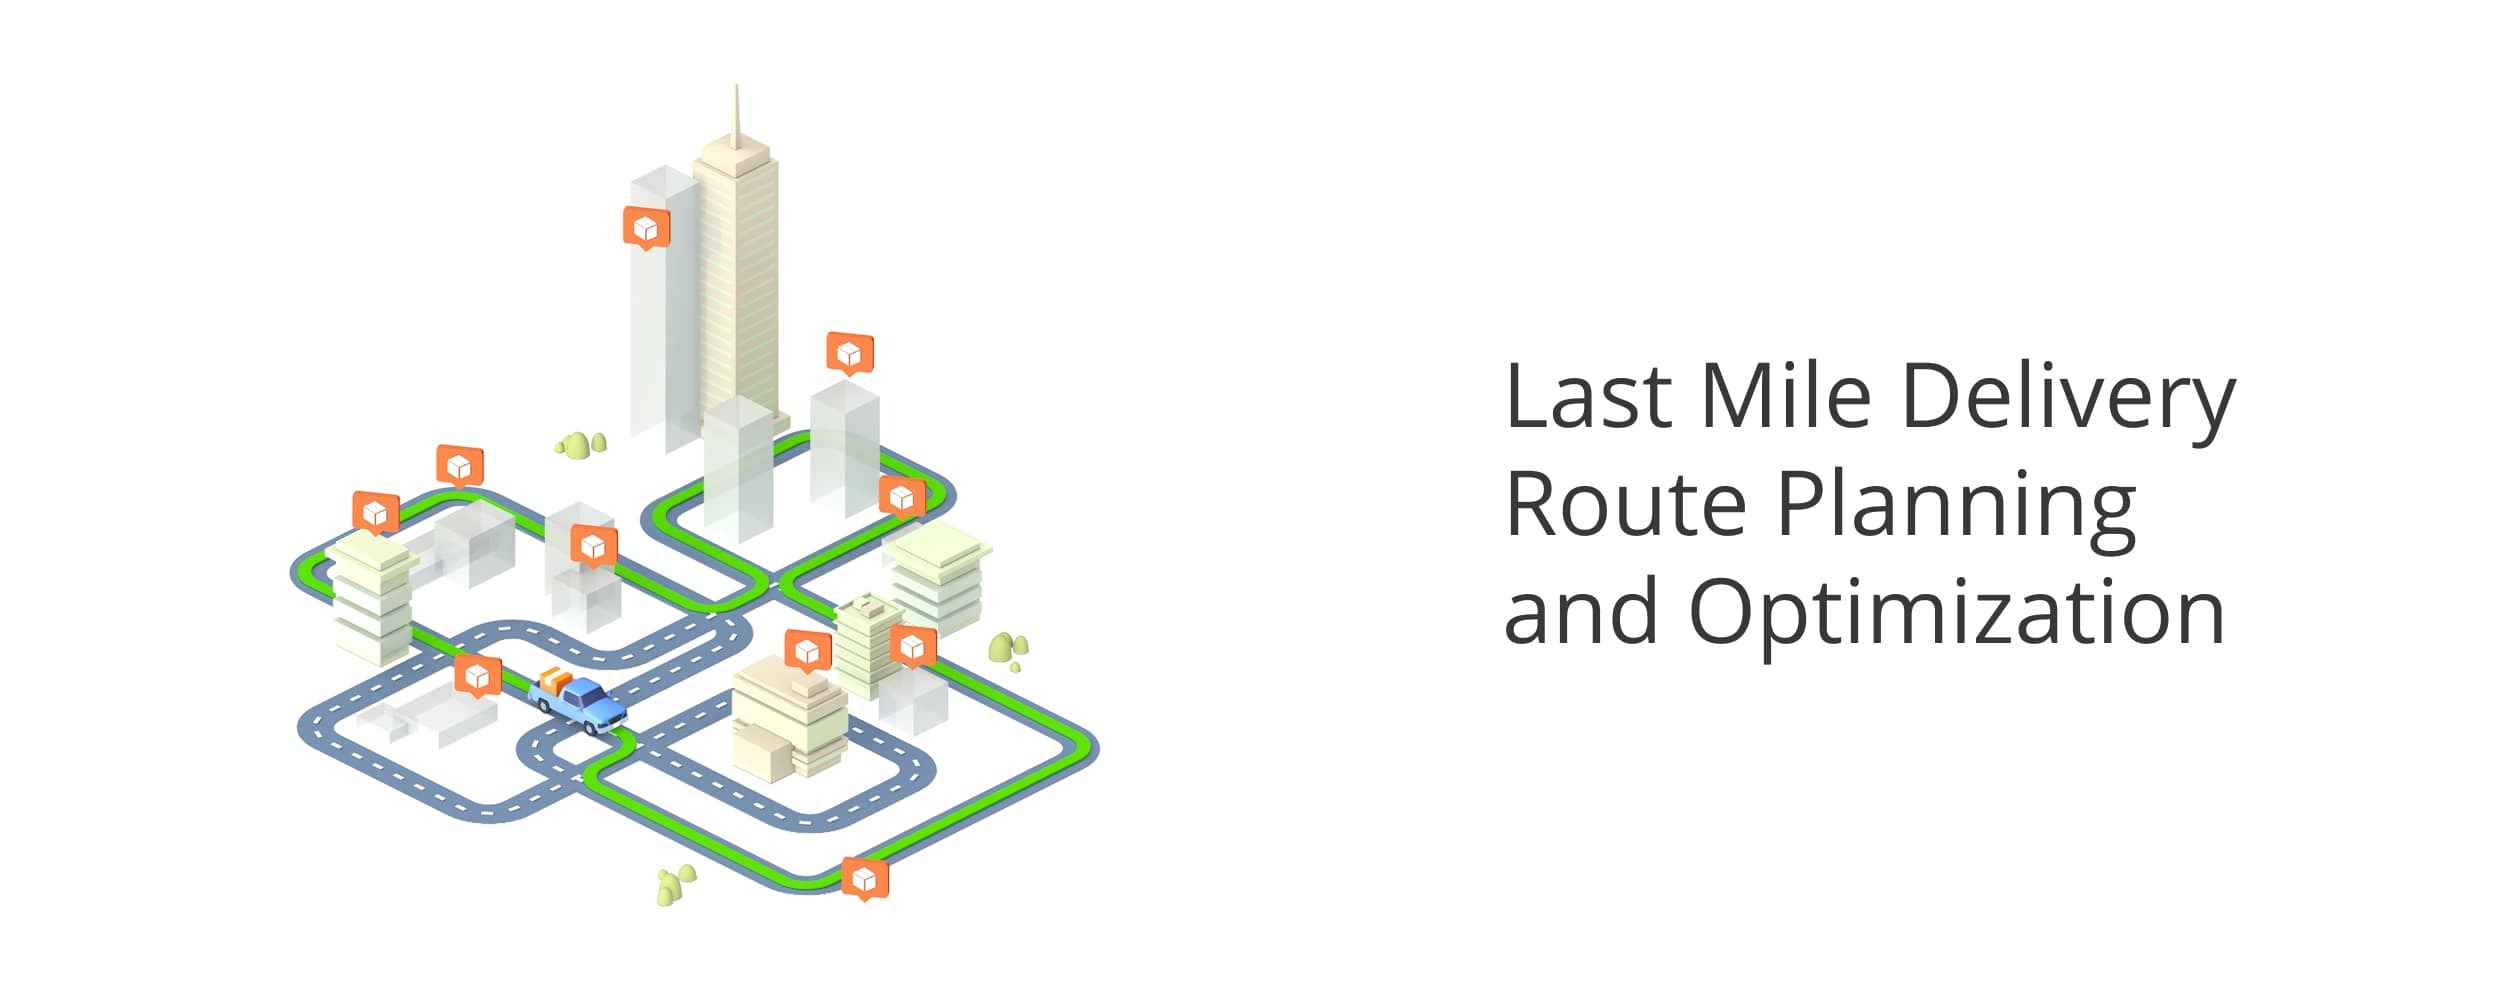 Route planning and route optimization for last mile logistics and last mile carriers.